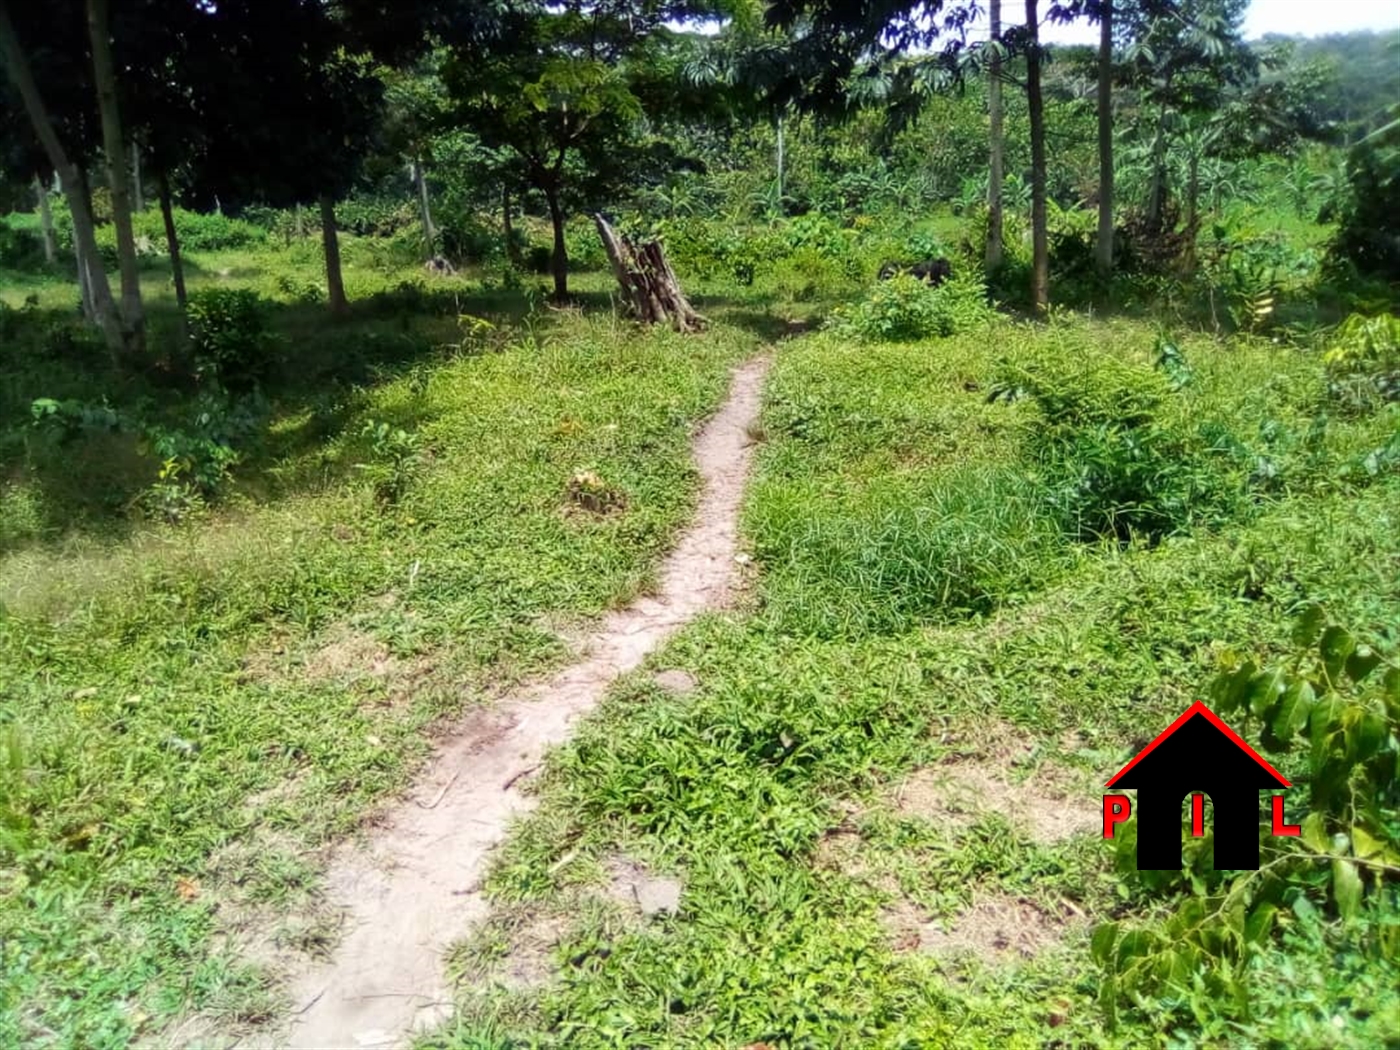 Agricultural Land for sale in Mabuye Luweero